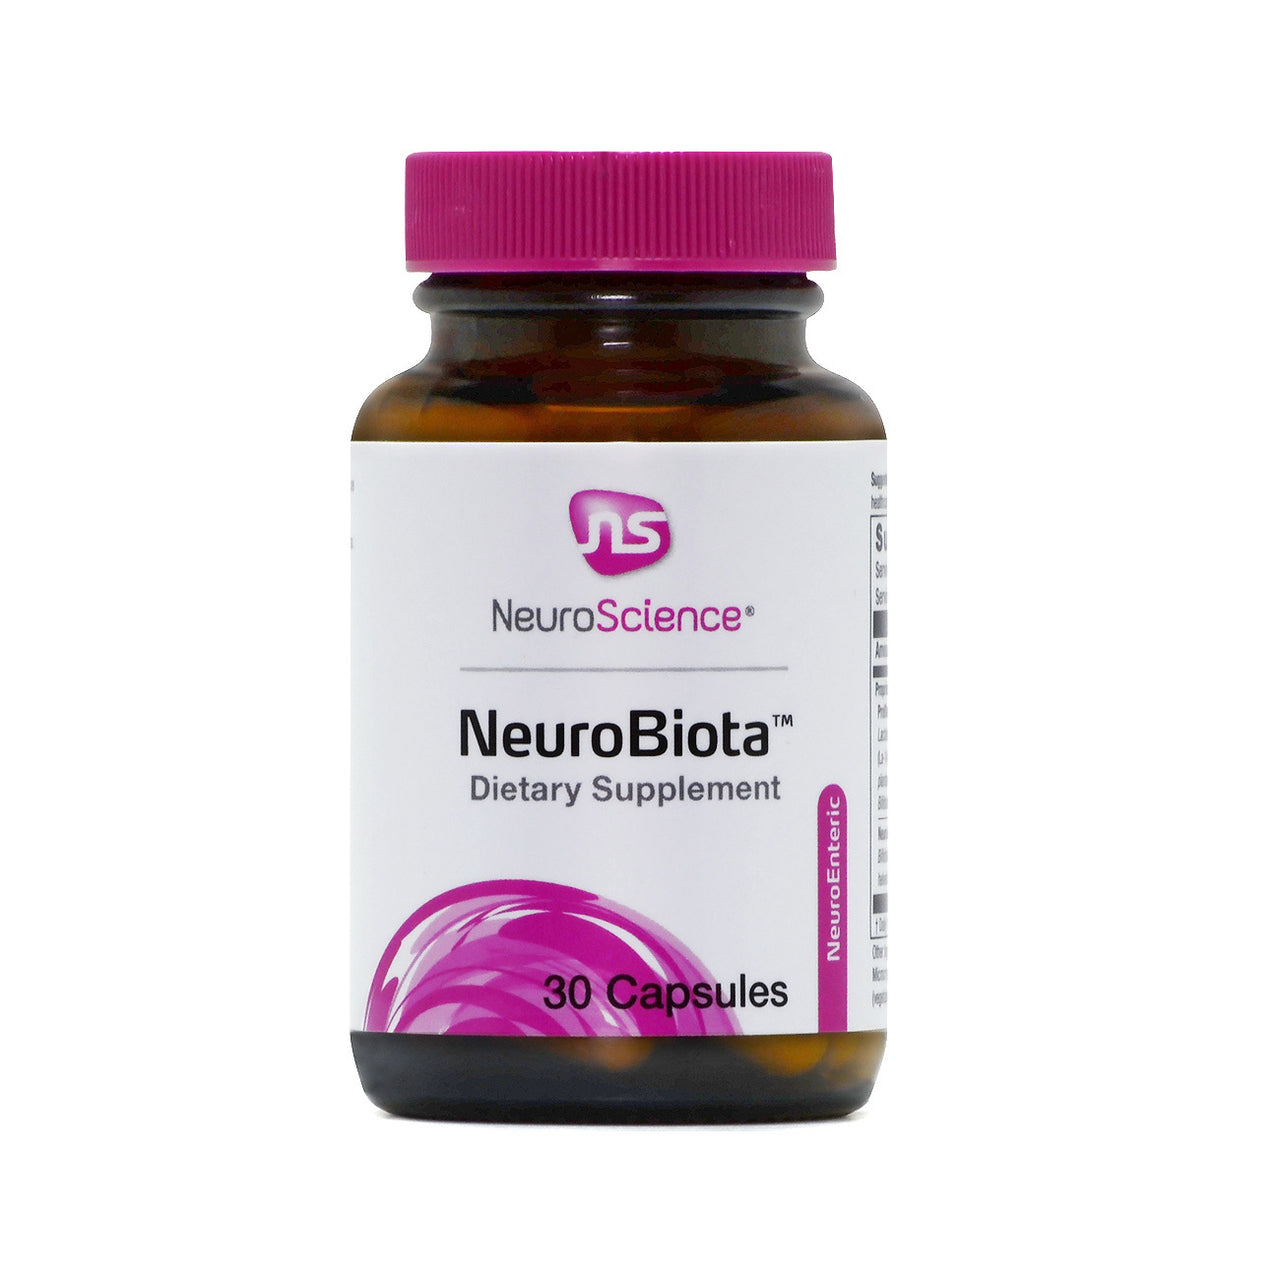 NeuroBiota - Neuroscience Inc - Contains unique blends of probiotics to support the Gut-Brain Axis